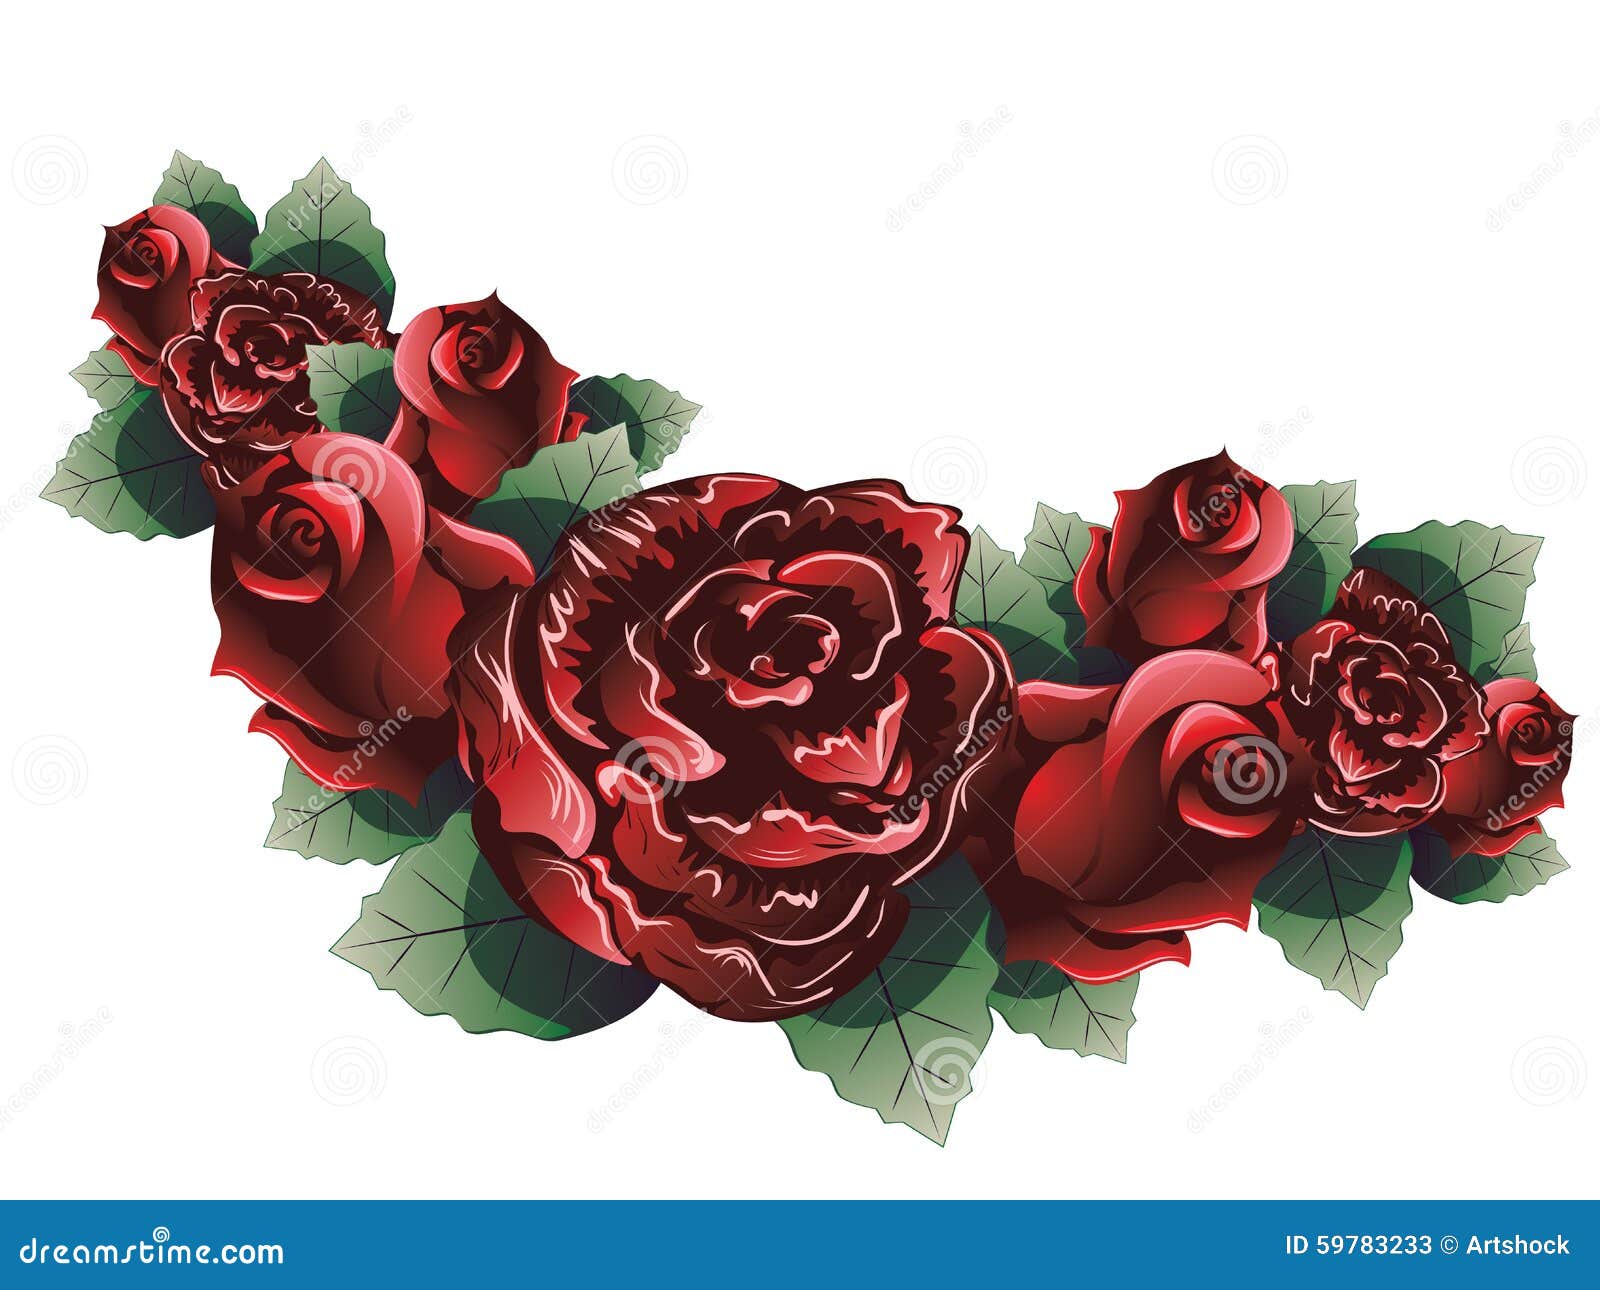 Red Roses with Leaves stock vector. Illustration of spring - 59783233